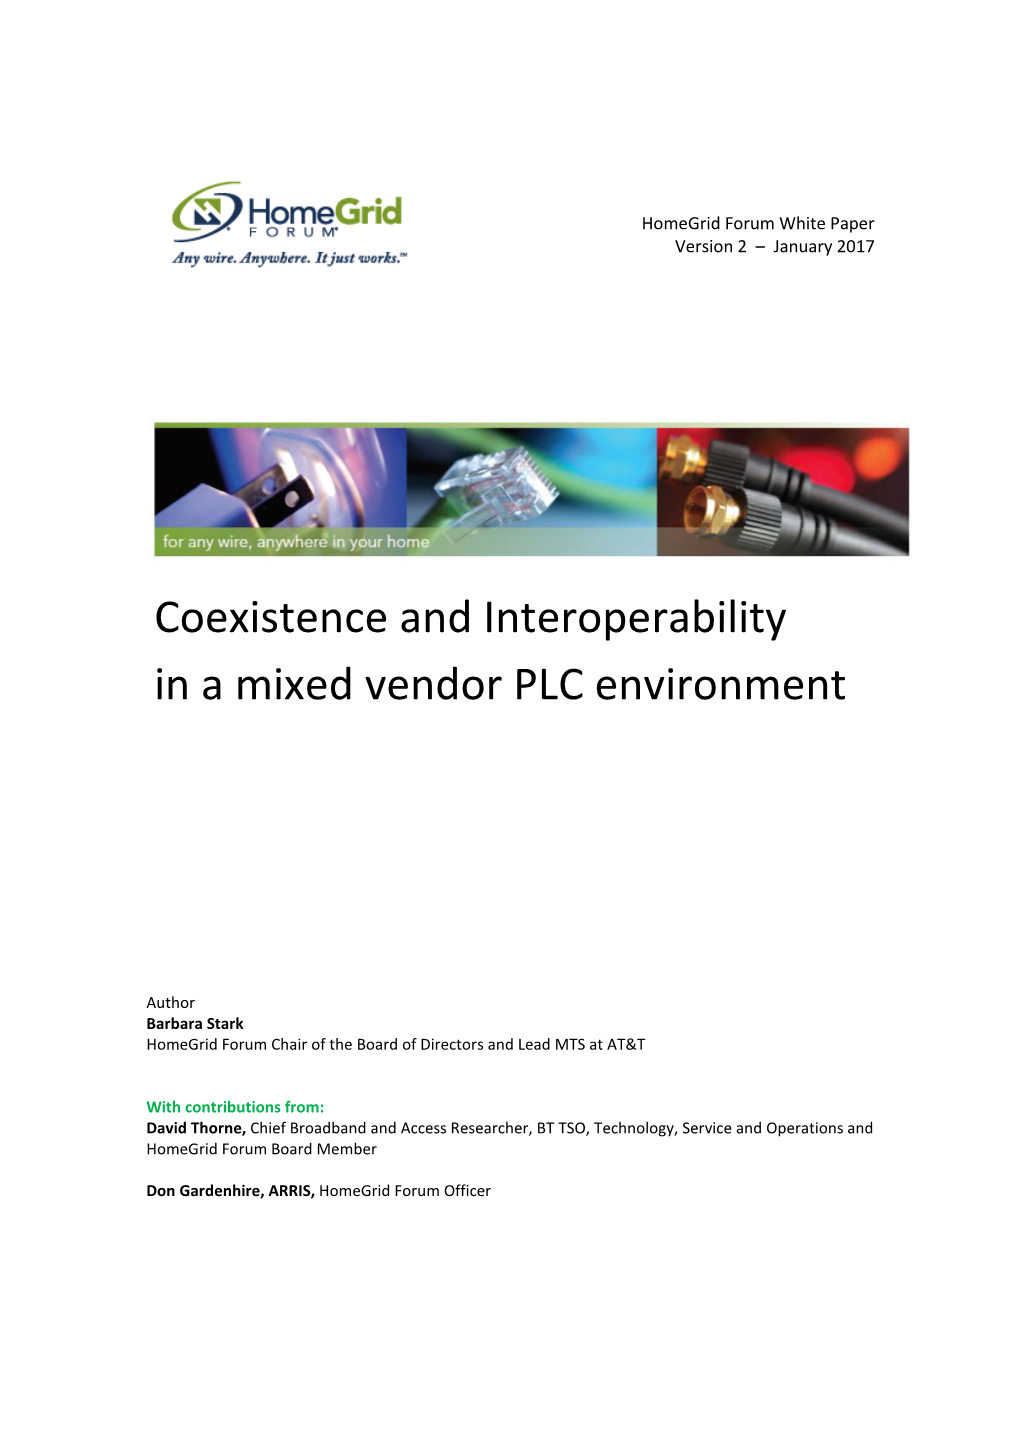 Coexistence and Interoperability in a Mixed Vendor PLC Environment